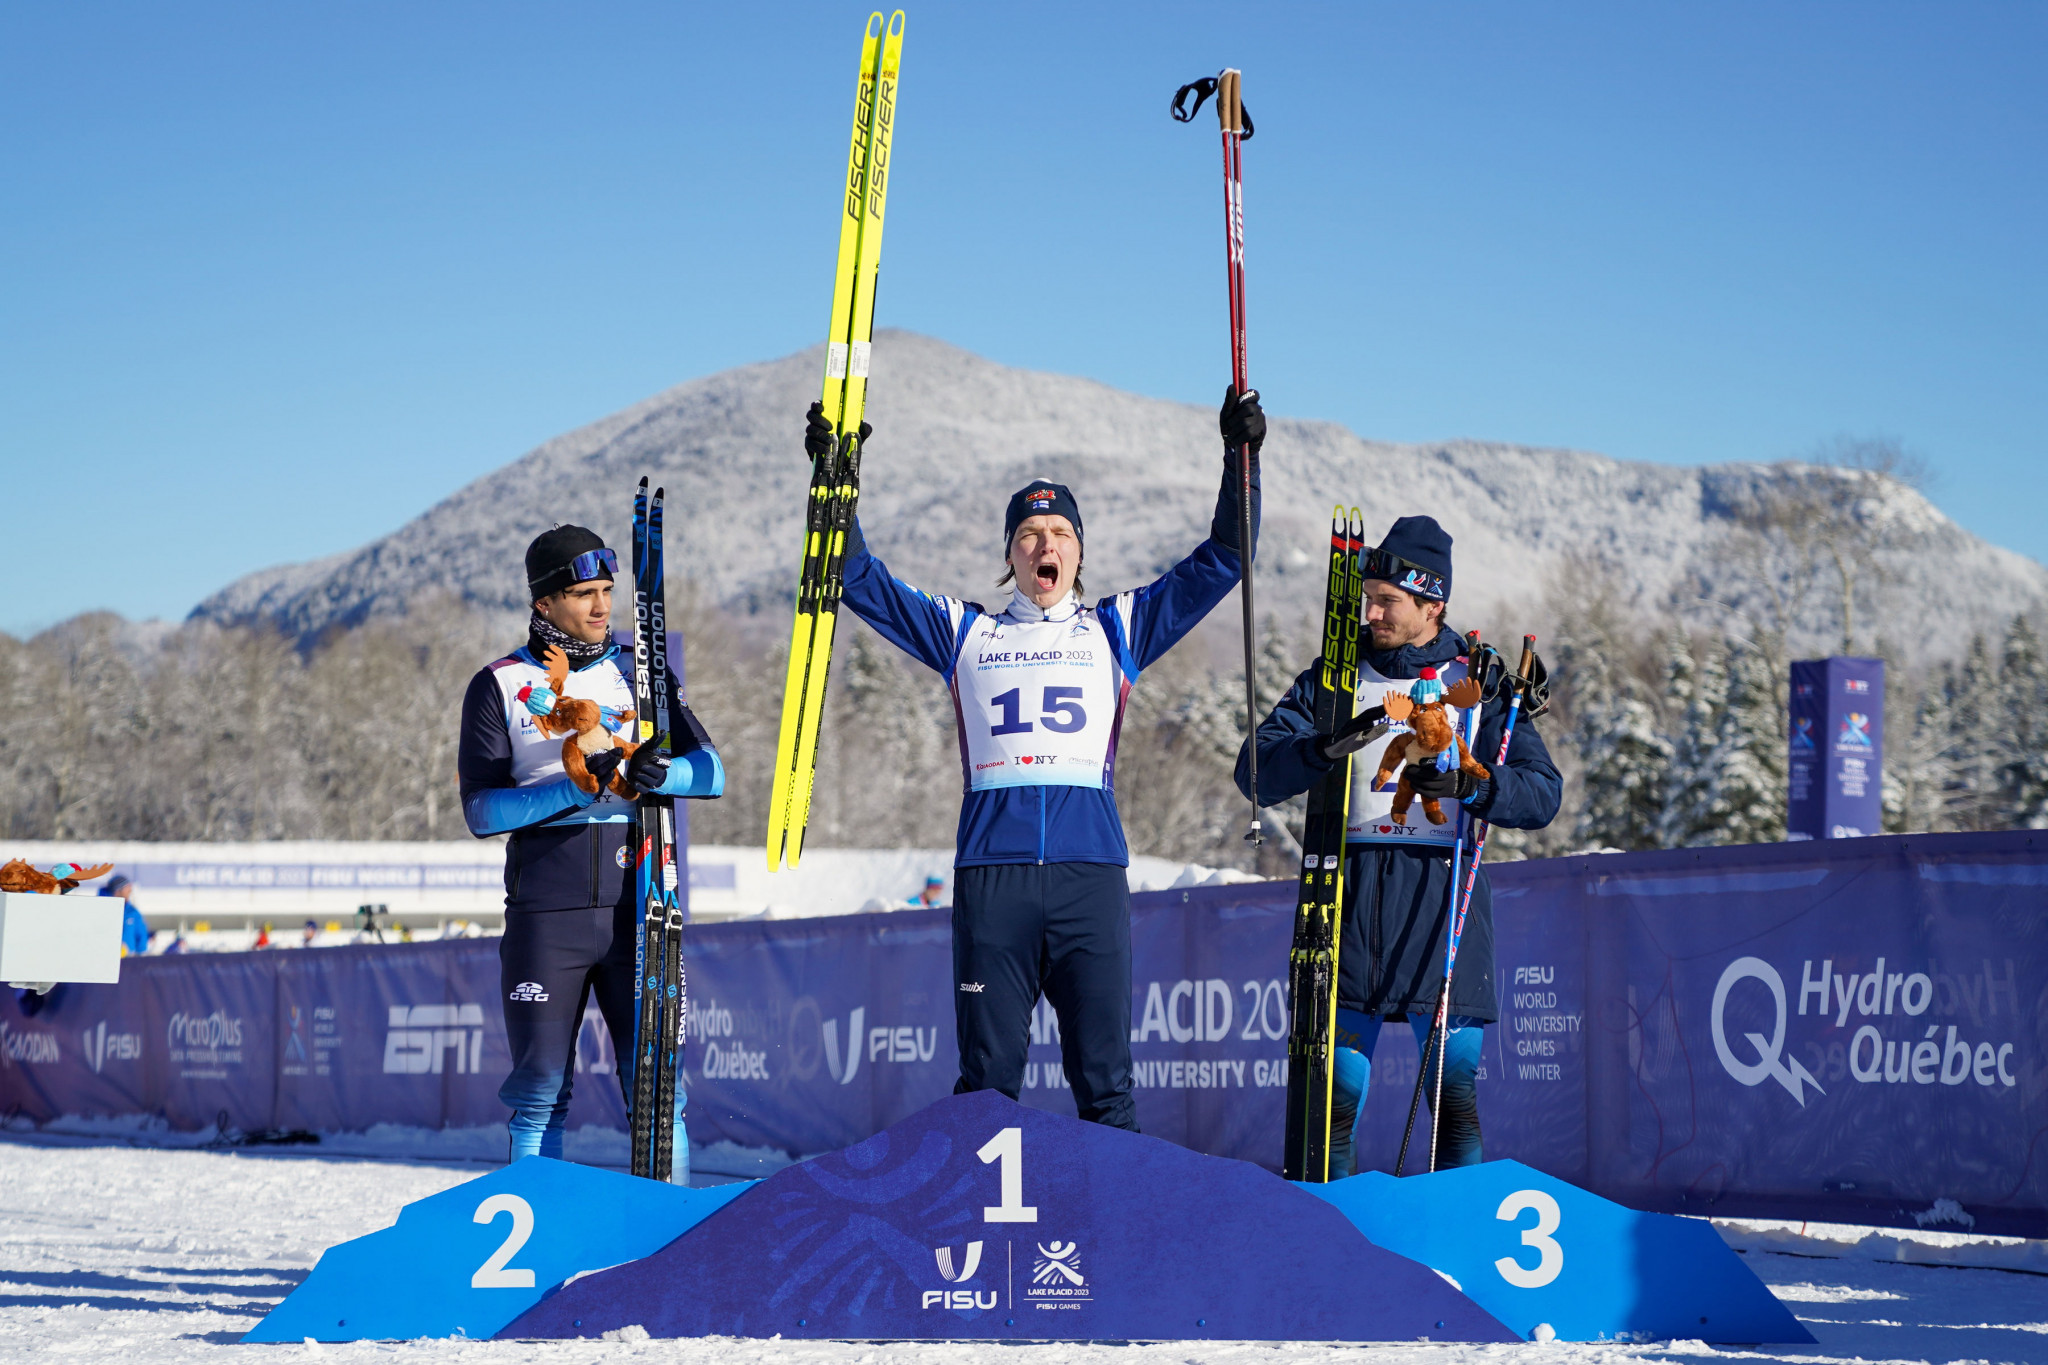 Spaniard Jaume Pueyo, left, and France's Tom Mancini managed to bag silver and bronze, respectively, in the men's contest ©FISU